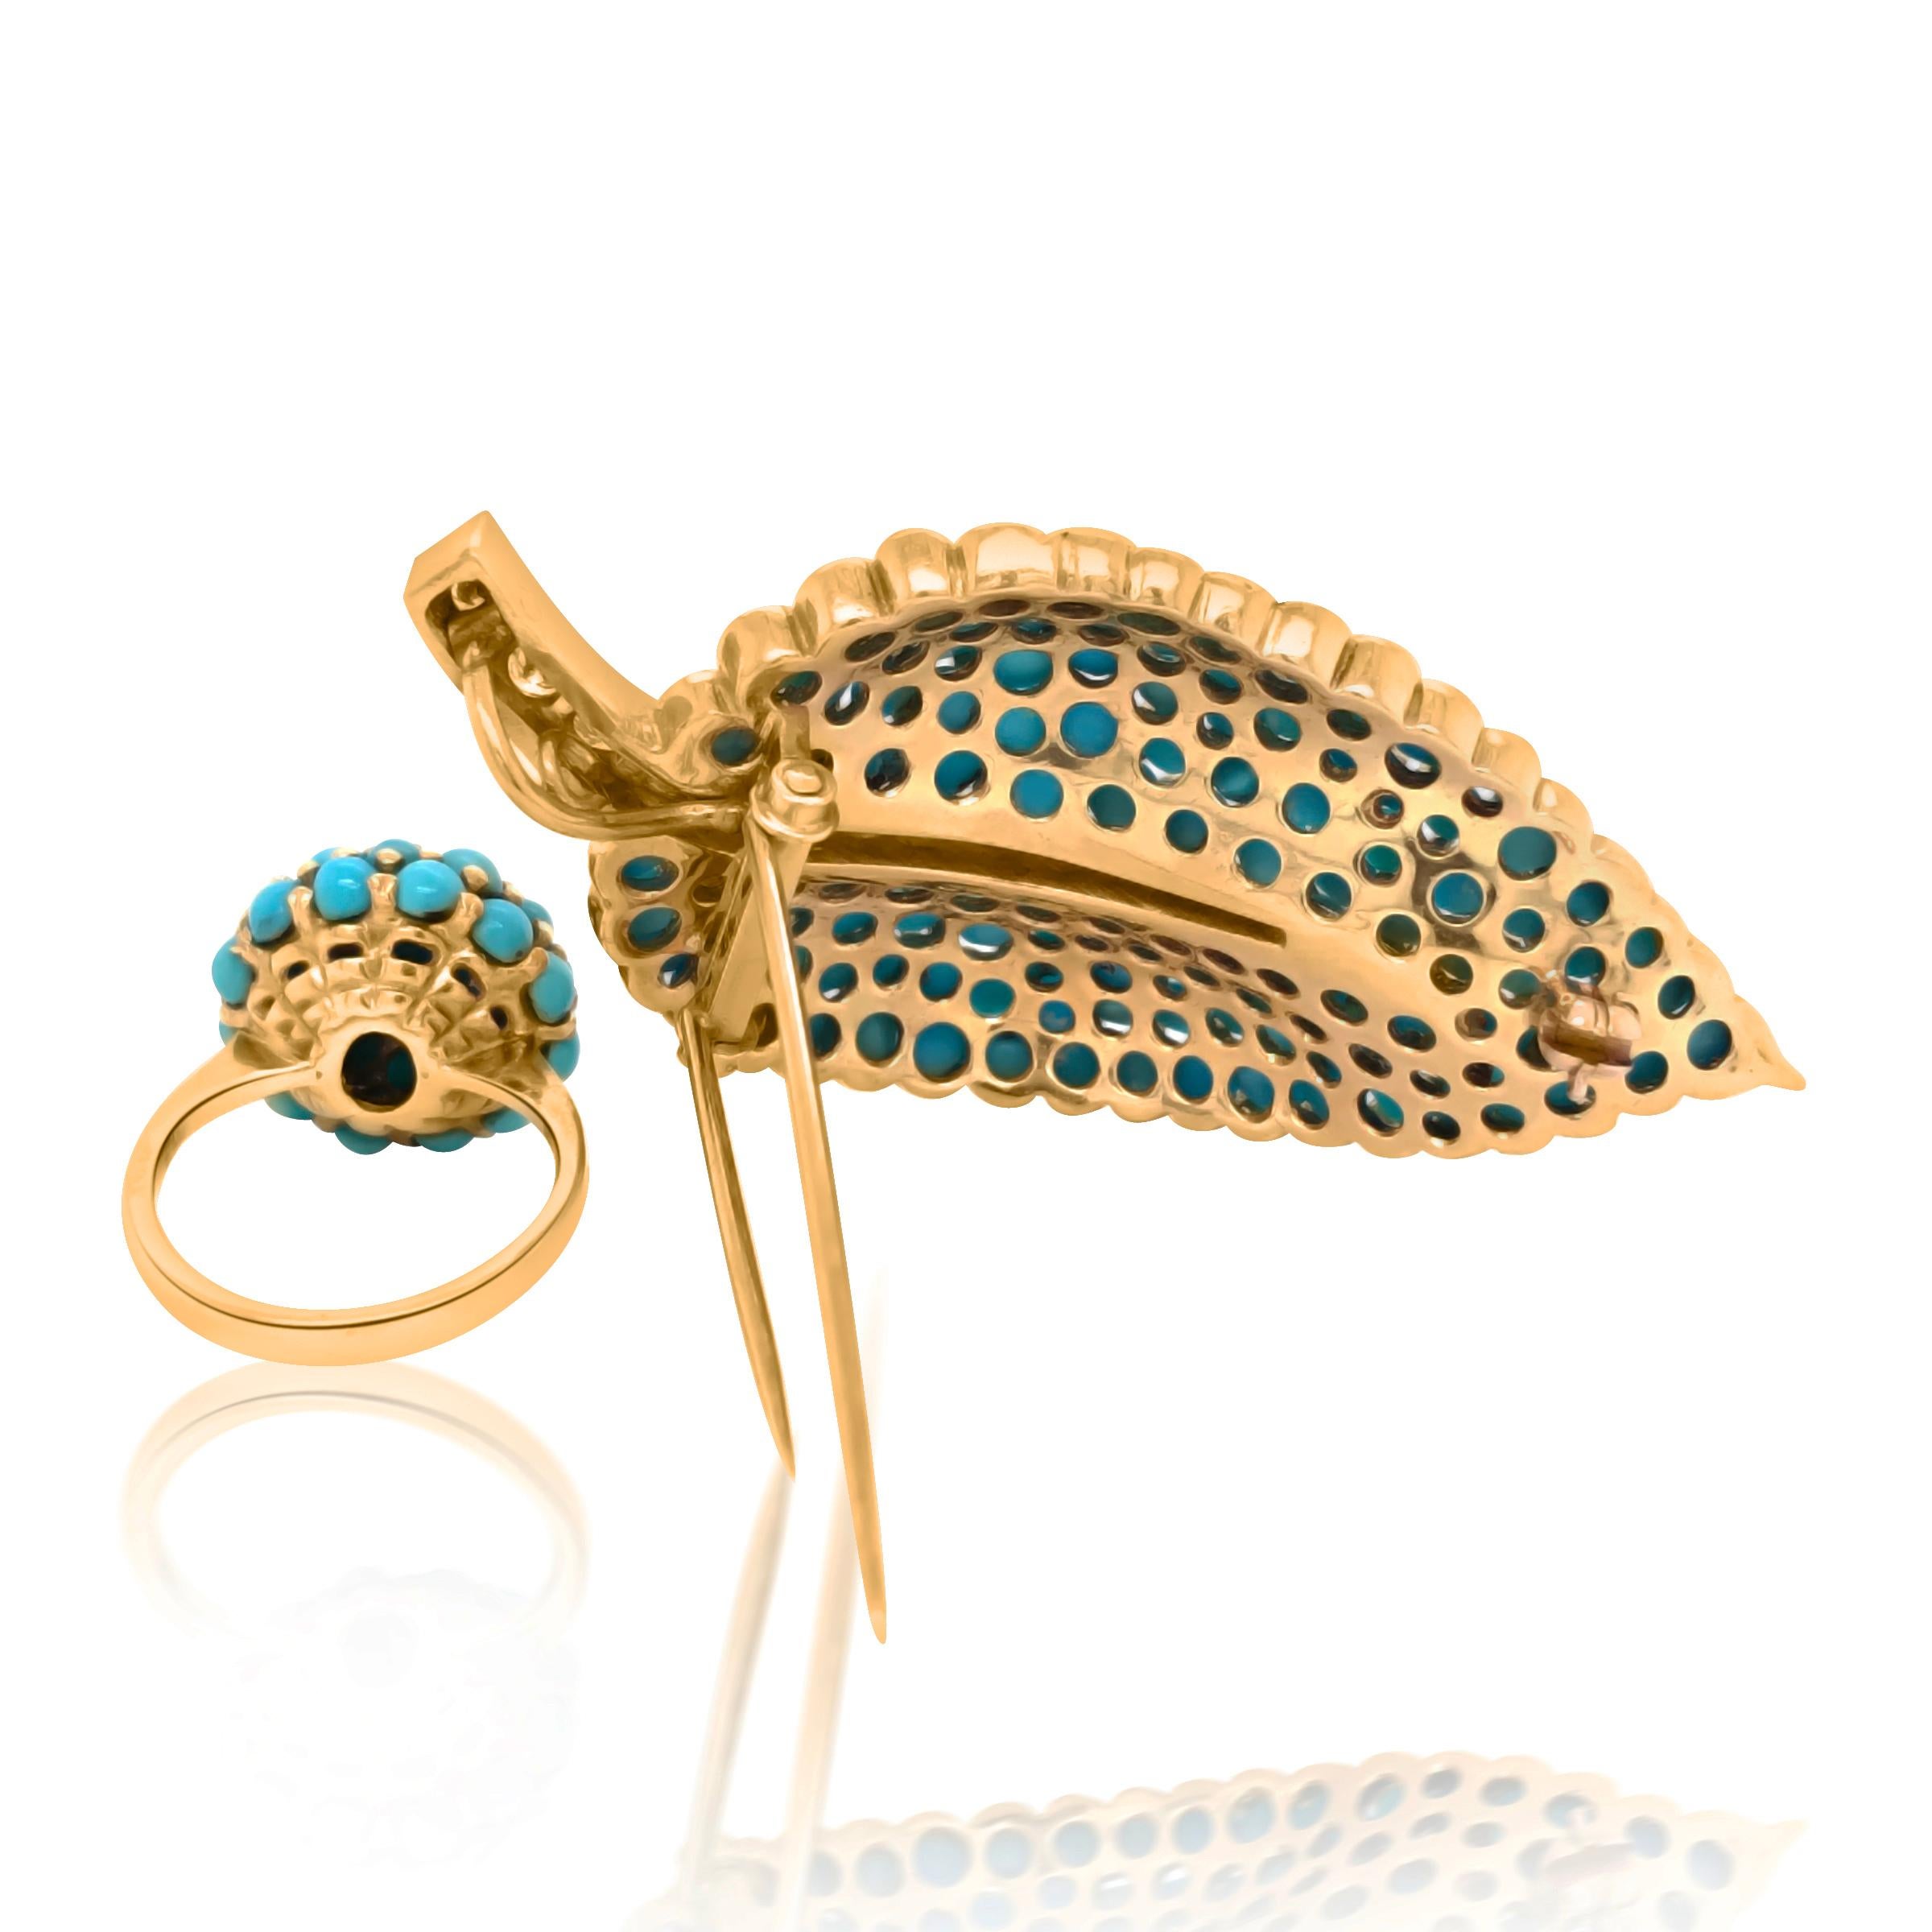 This elegant turquoise and diamond Brooch is designed as a leaf with a waved surface, weighing 19.04 grams, measuring 5.3*2.9cm, enhanced with a diamond stem, weighing approx. 0.33ct. This leaf brooch also has a matched a turquoise ring, mounted on